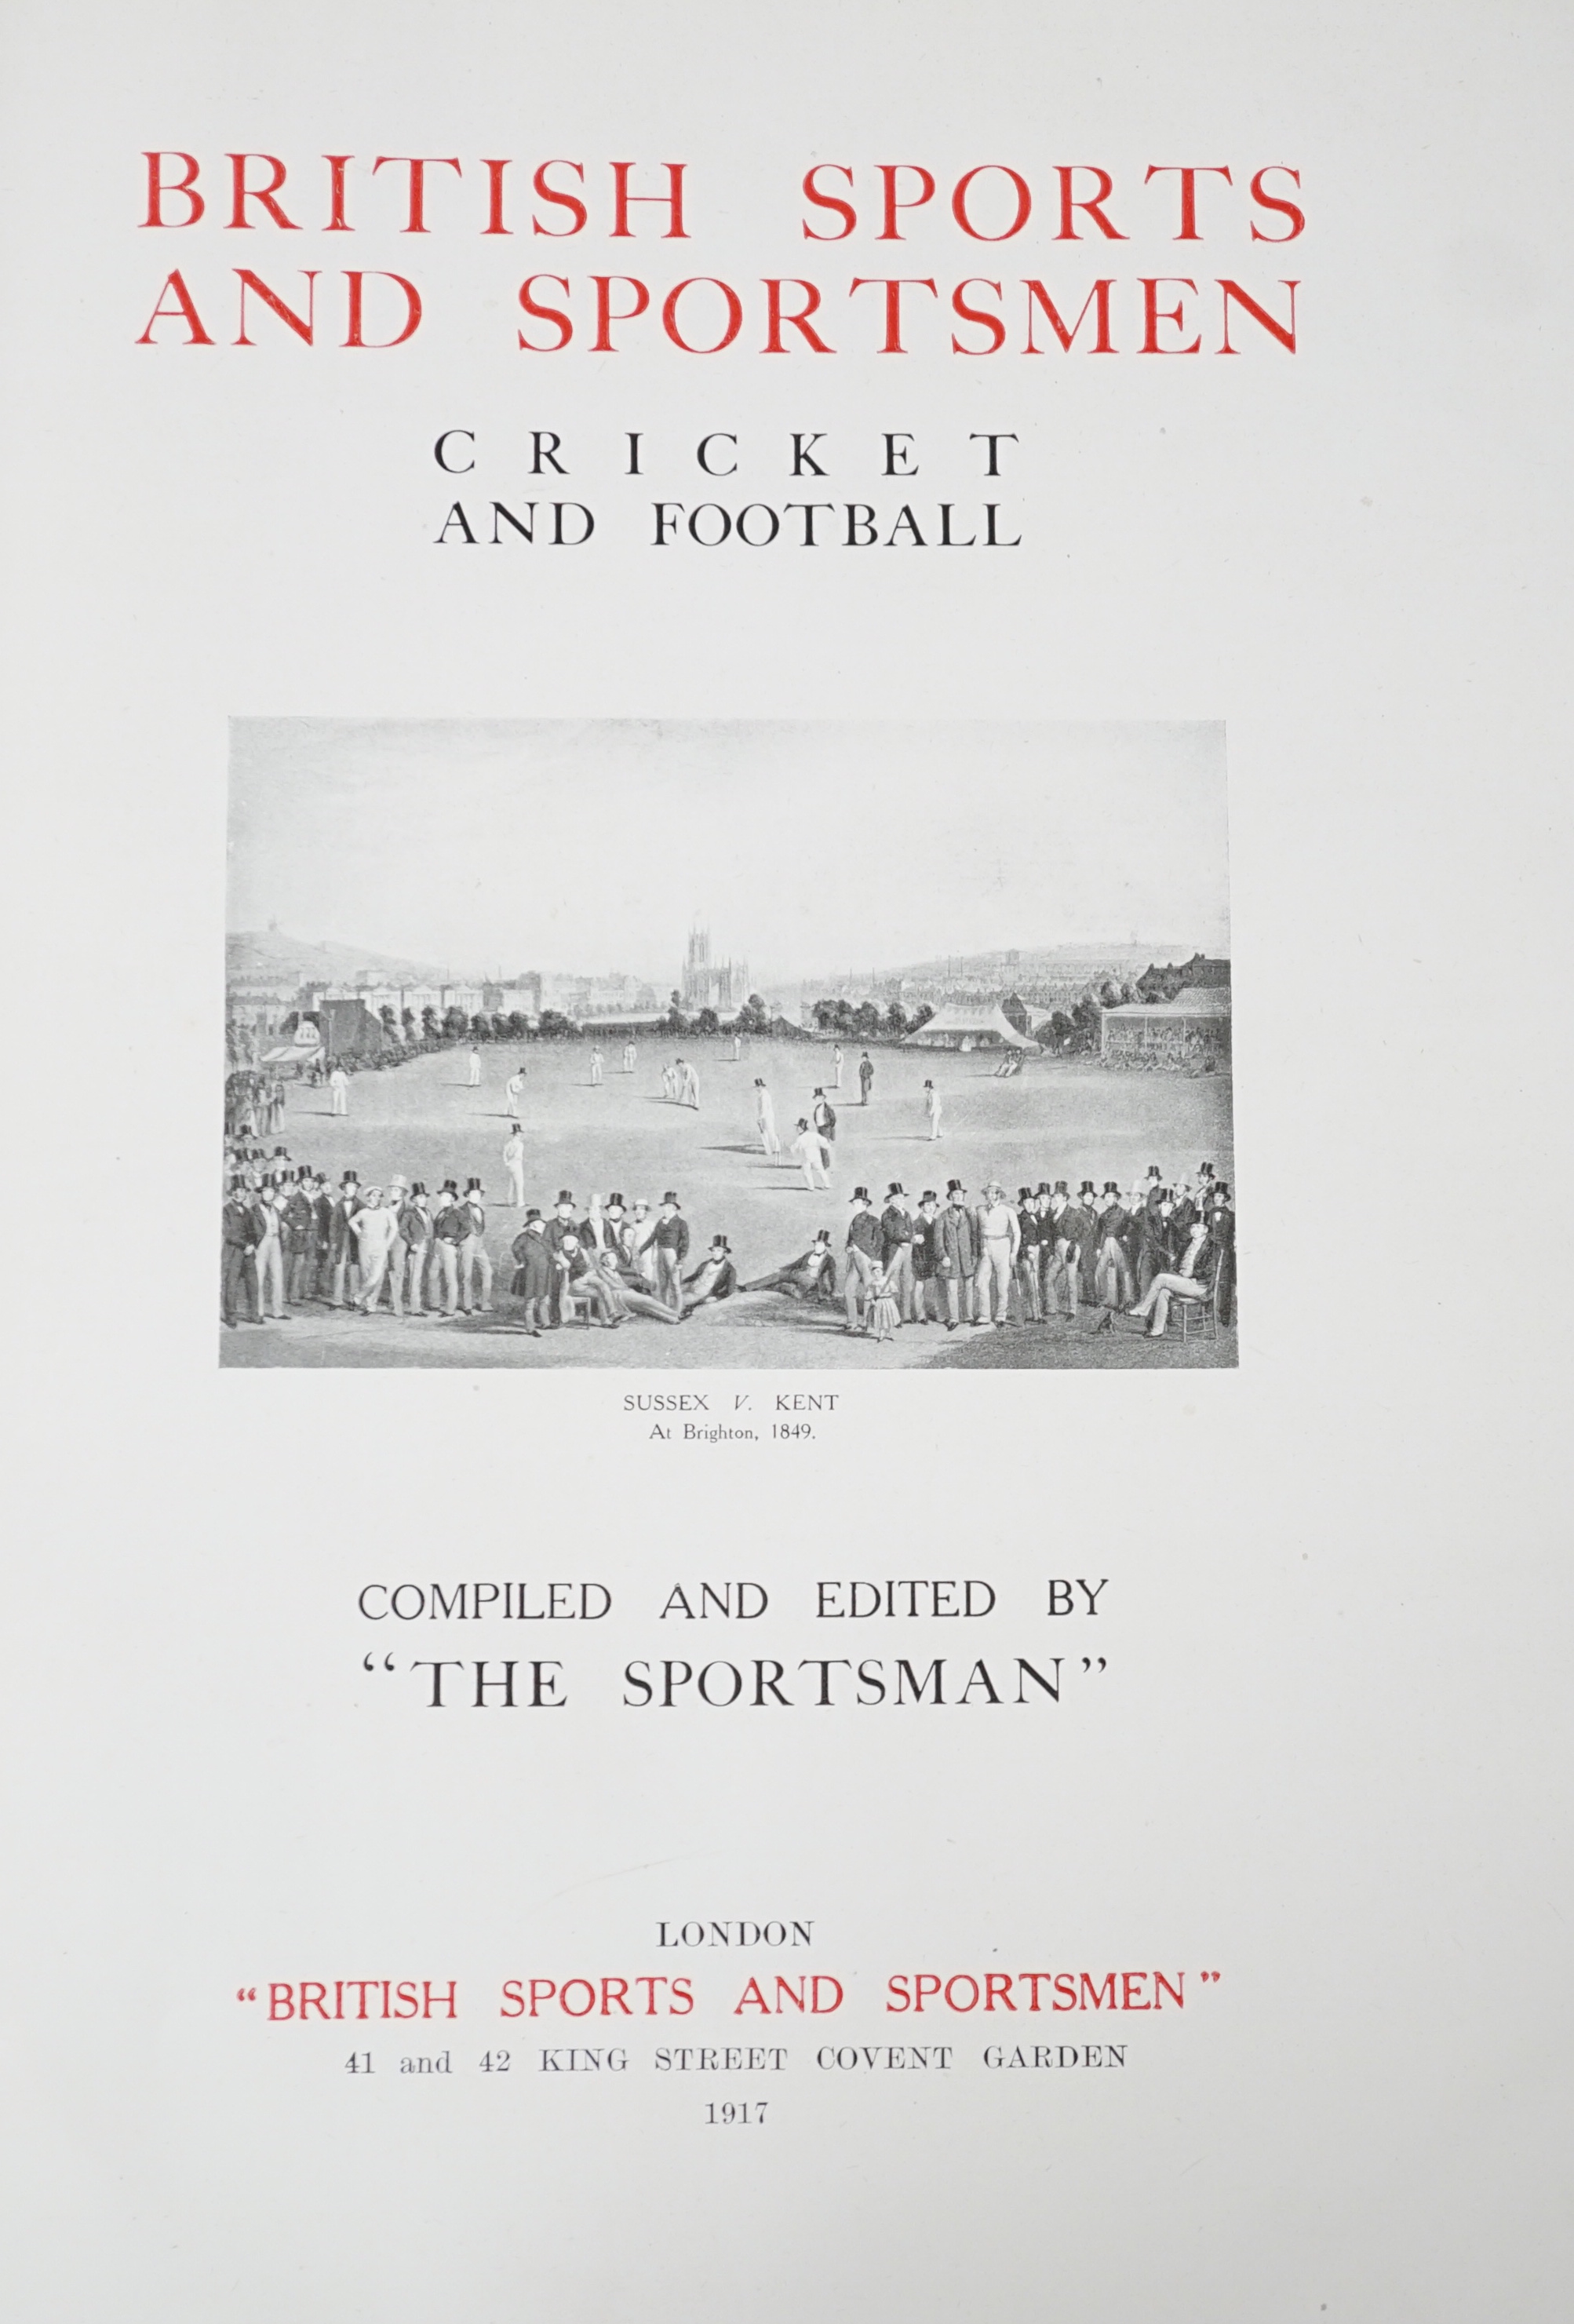 British Sports and Sportsmen; Cricket and Football, 1917, Shooting and Deerstalking 1913, Hunting 1912, Past and Present 1908 (vol. I only)